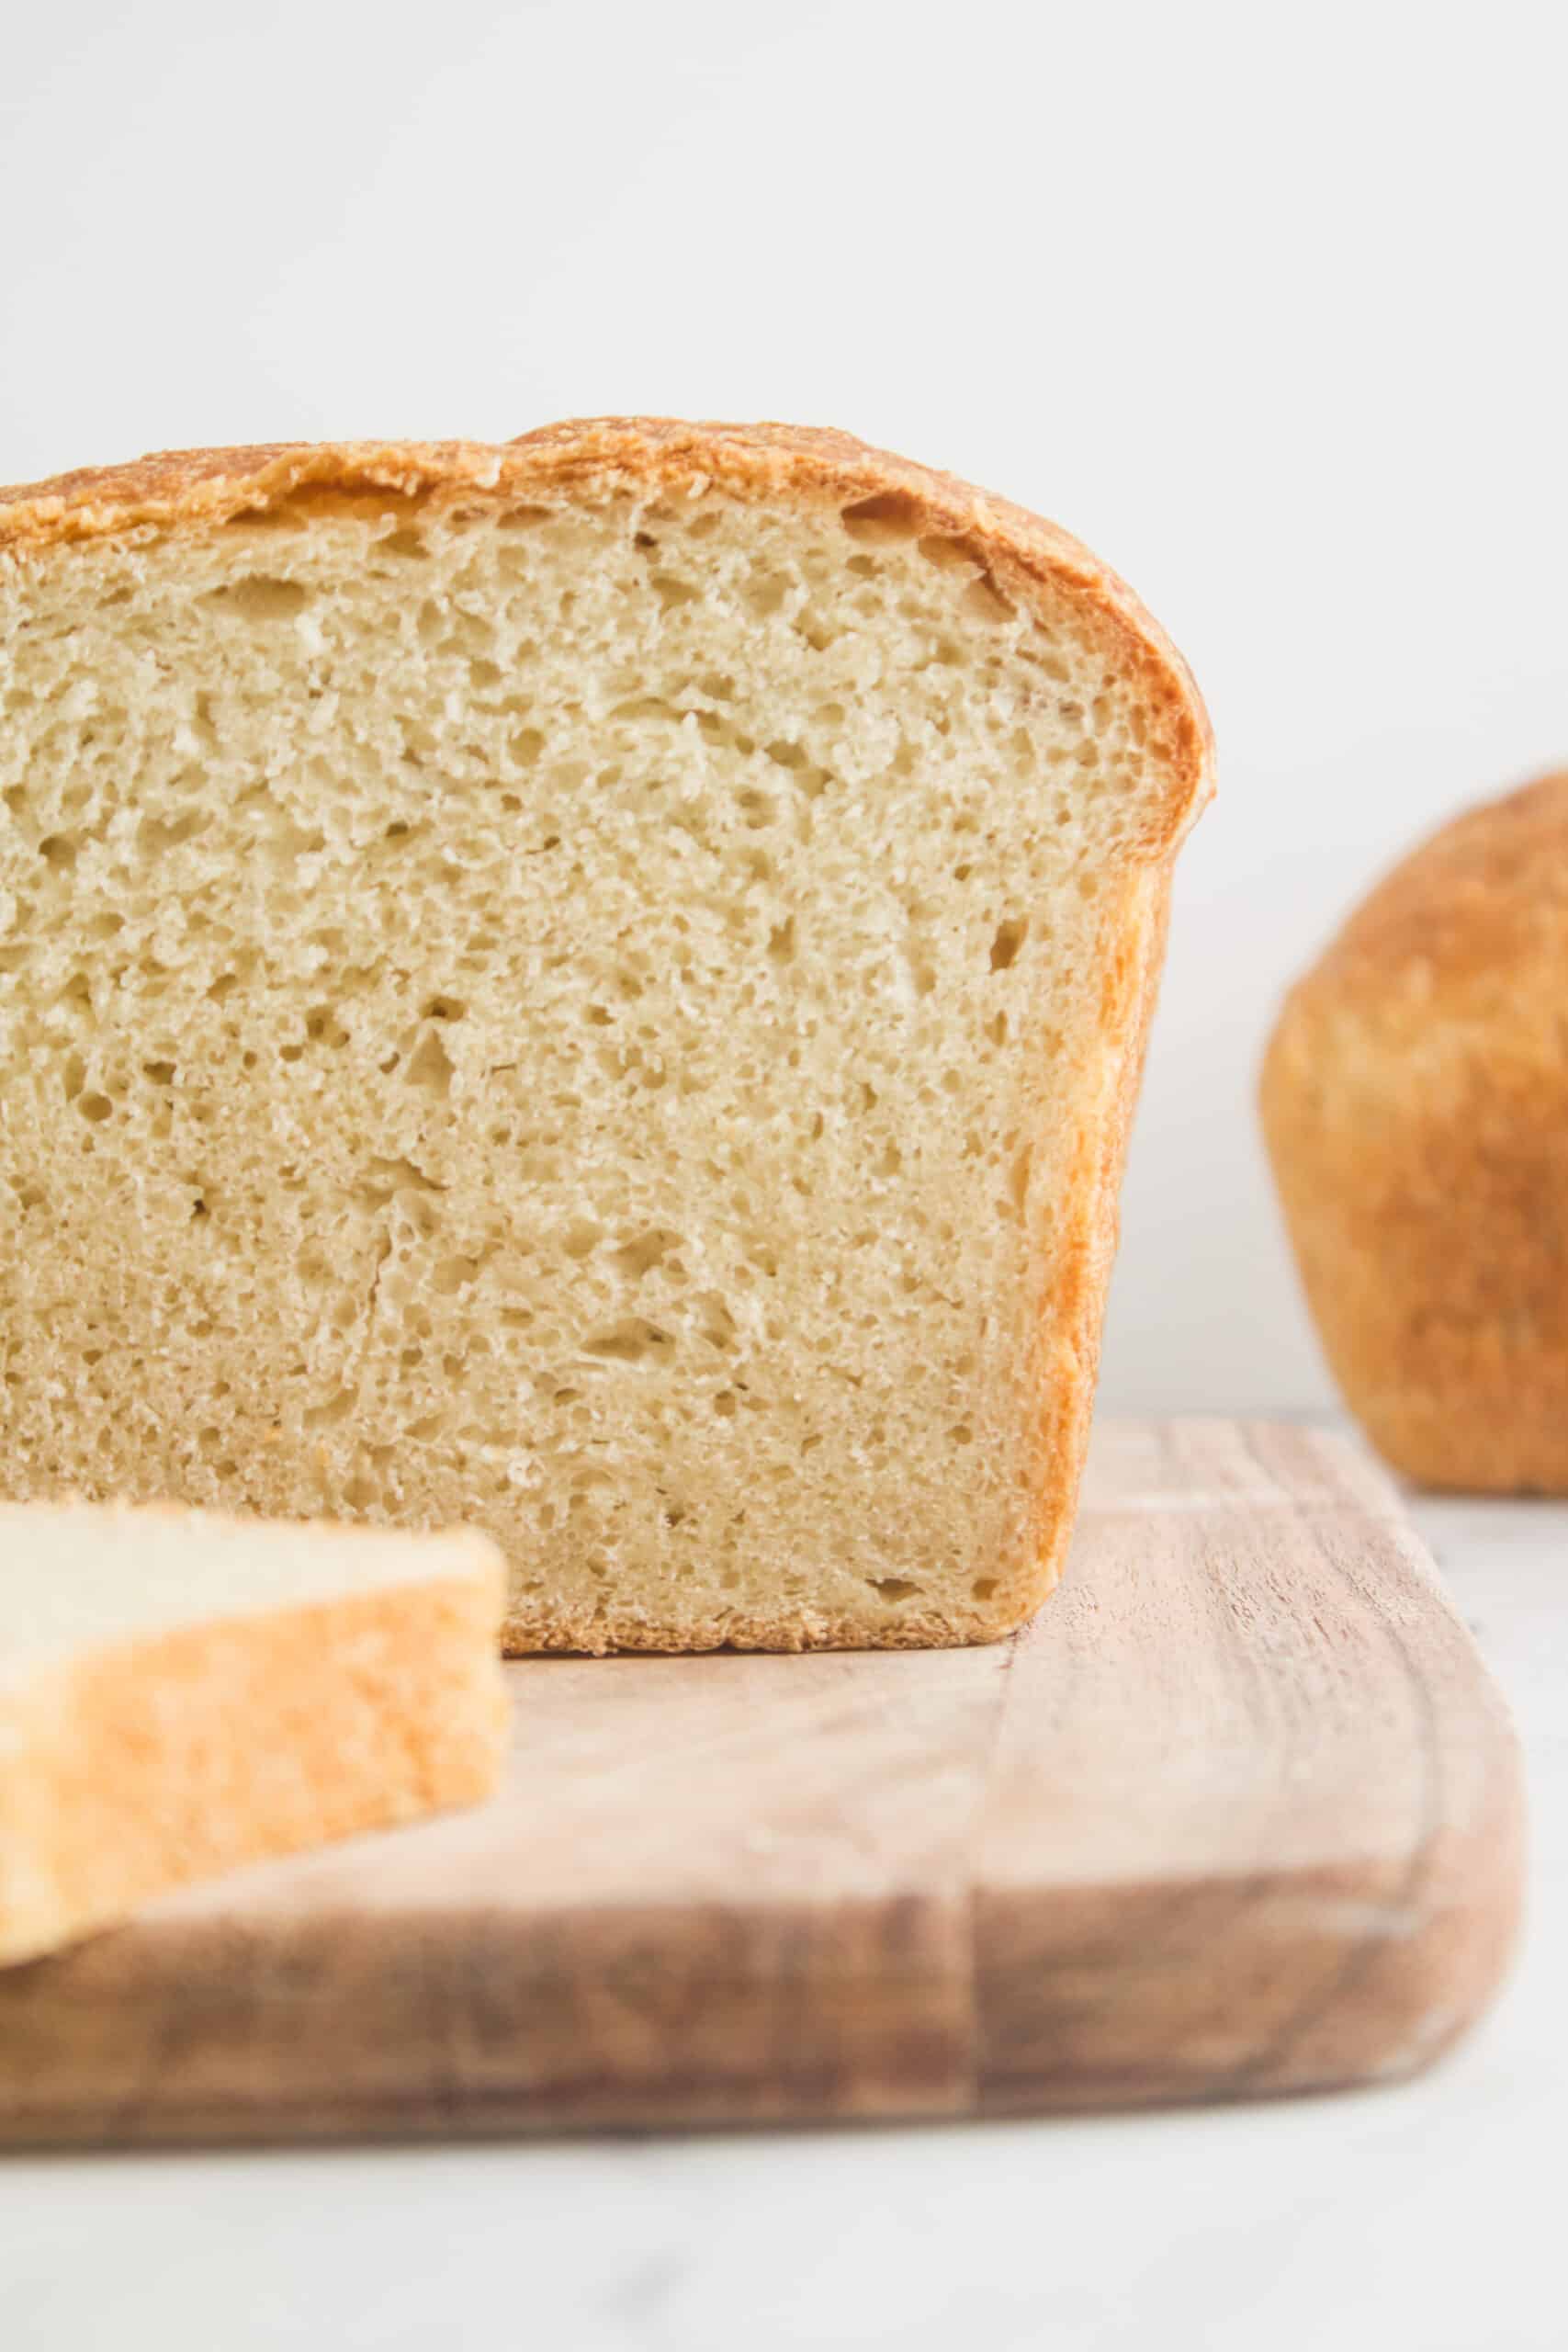 This image showcases a close-up "crumb shot" of sandwich bread, freshly cut and placed on a cutting board. Beside the loaf, there is a single slice of bread lying on its side. In the background, another loaf of bread can be seen, adding depth to the composition.